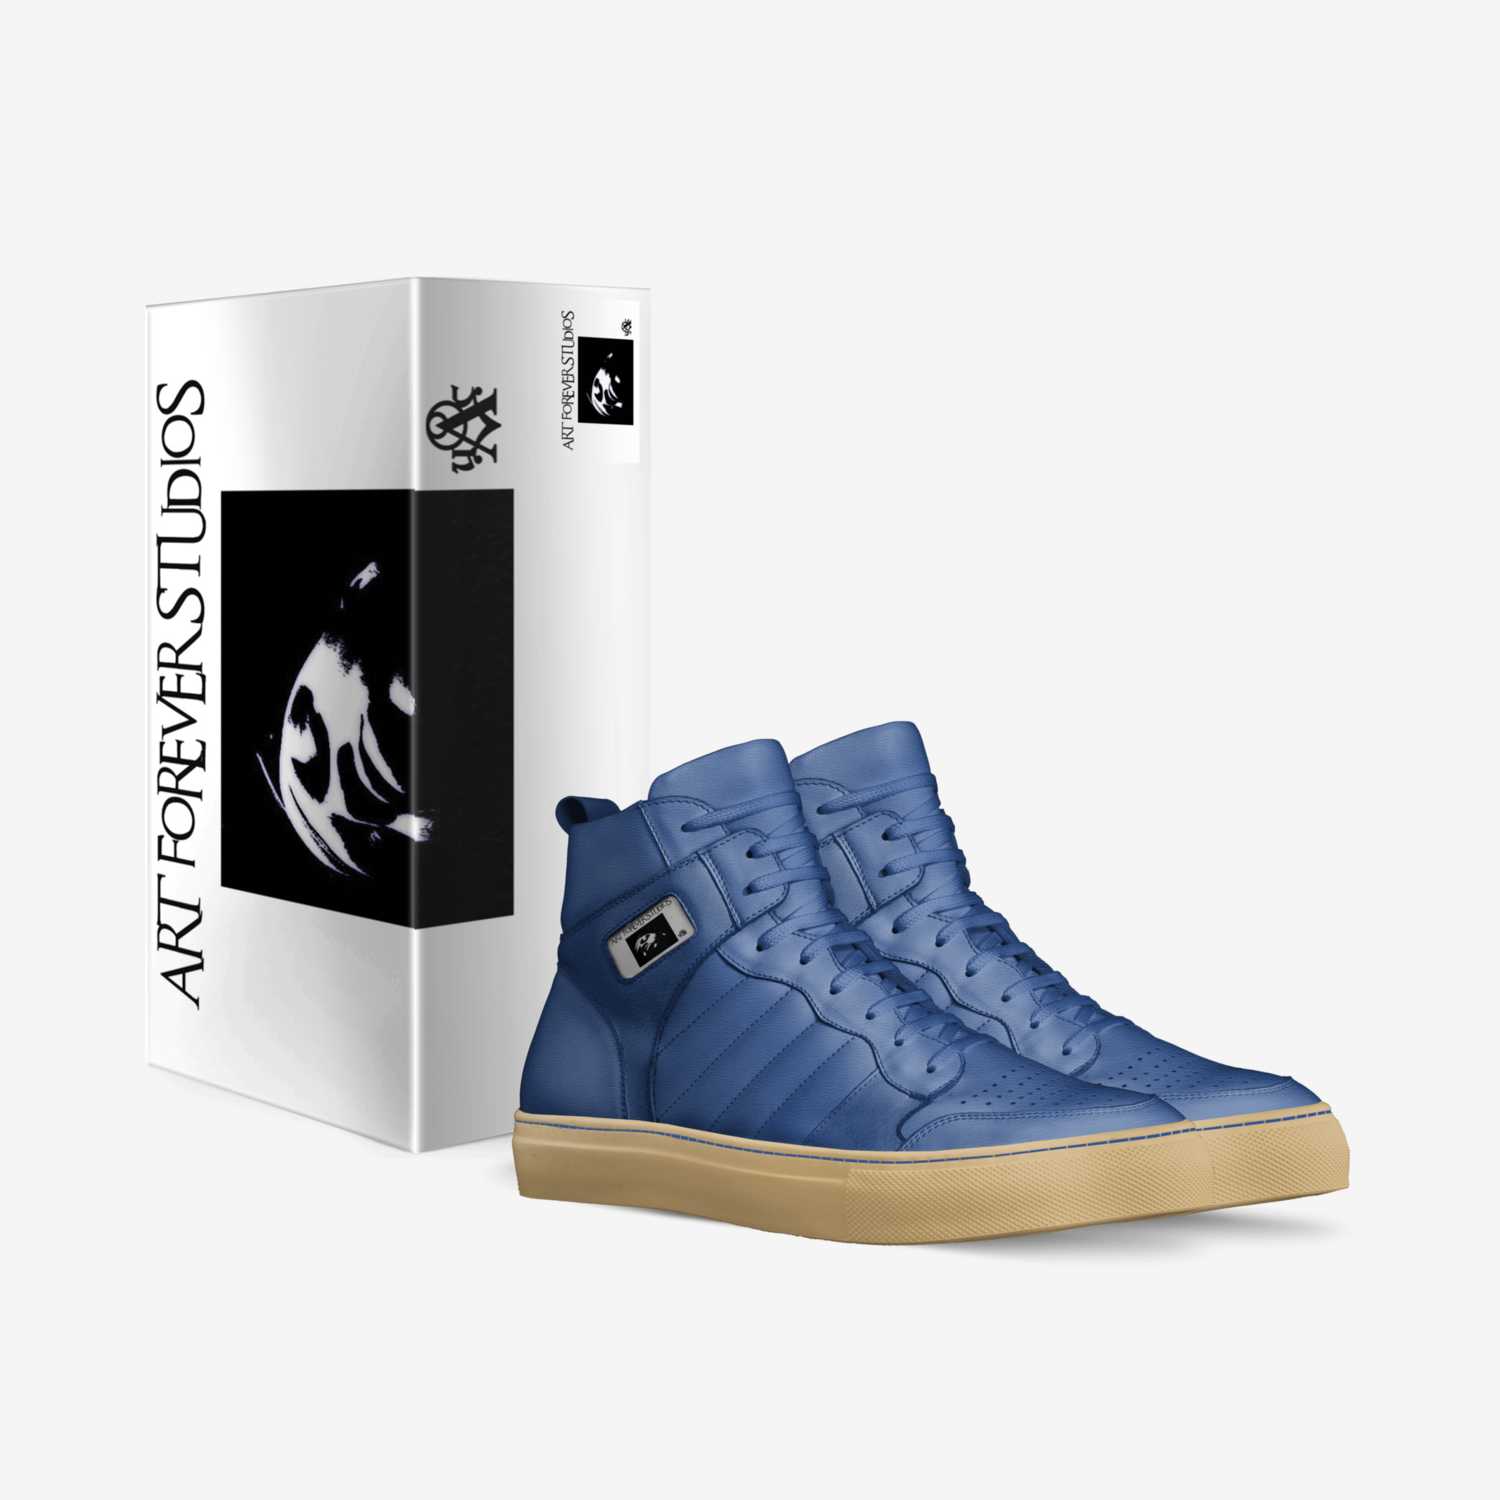 Addonis Parker custom made in Italy shoes by Urban Alchemist Clothing | Box view